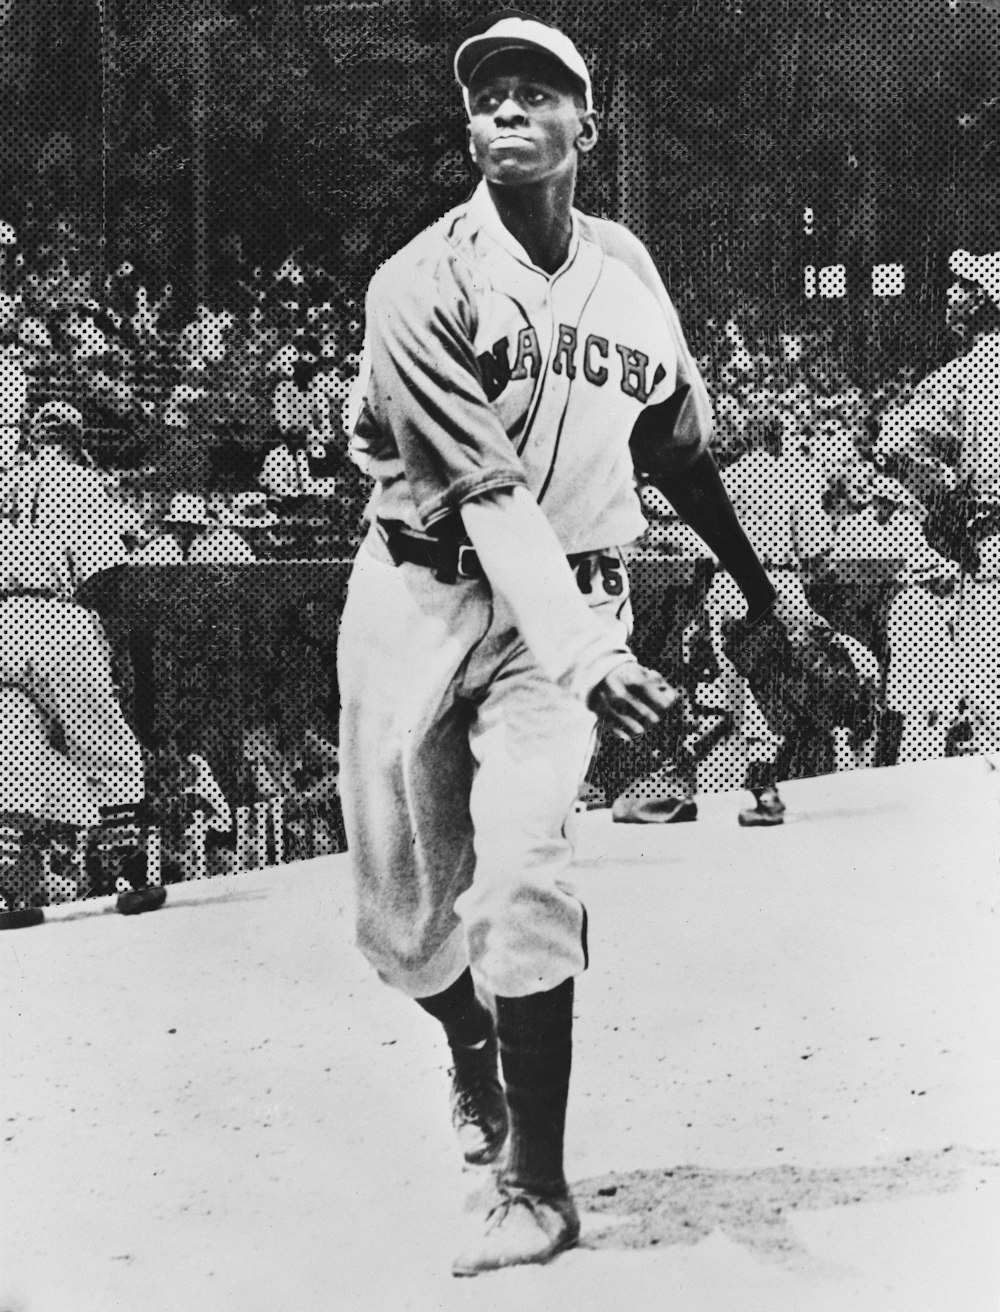 Satchel Paige, in the Kansas City Monarchs uniform at a baseball game.